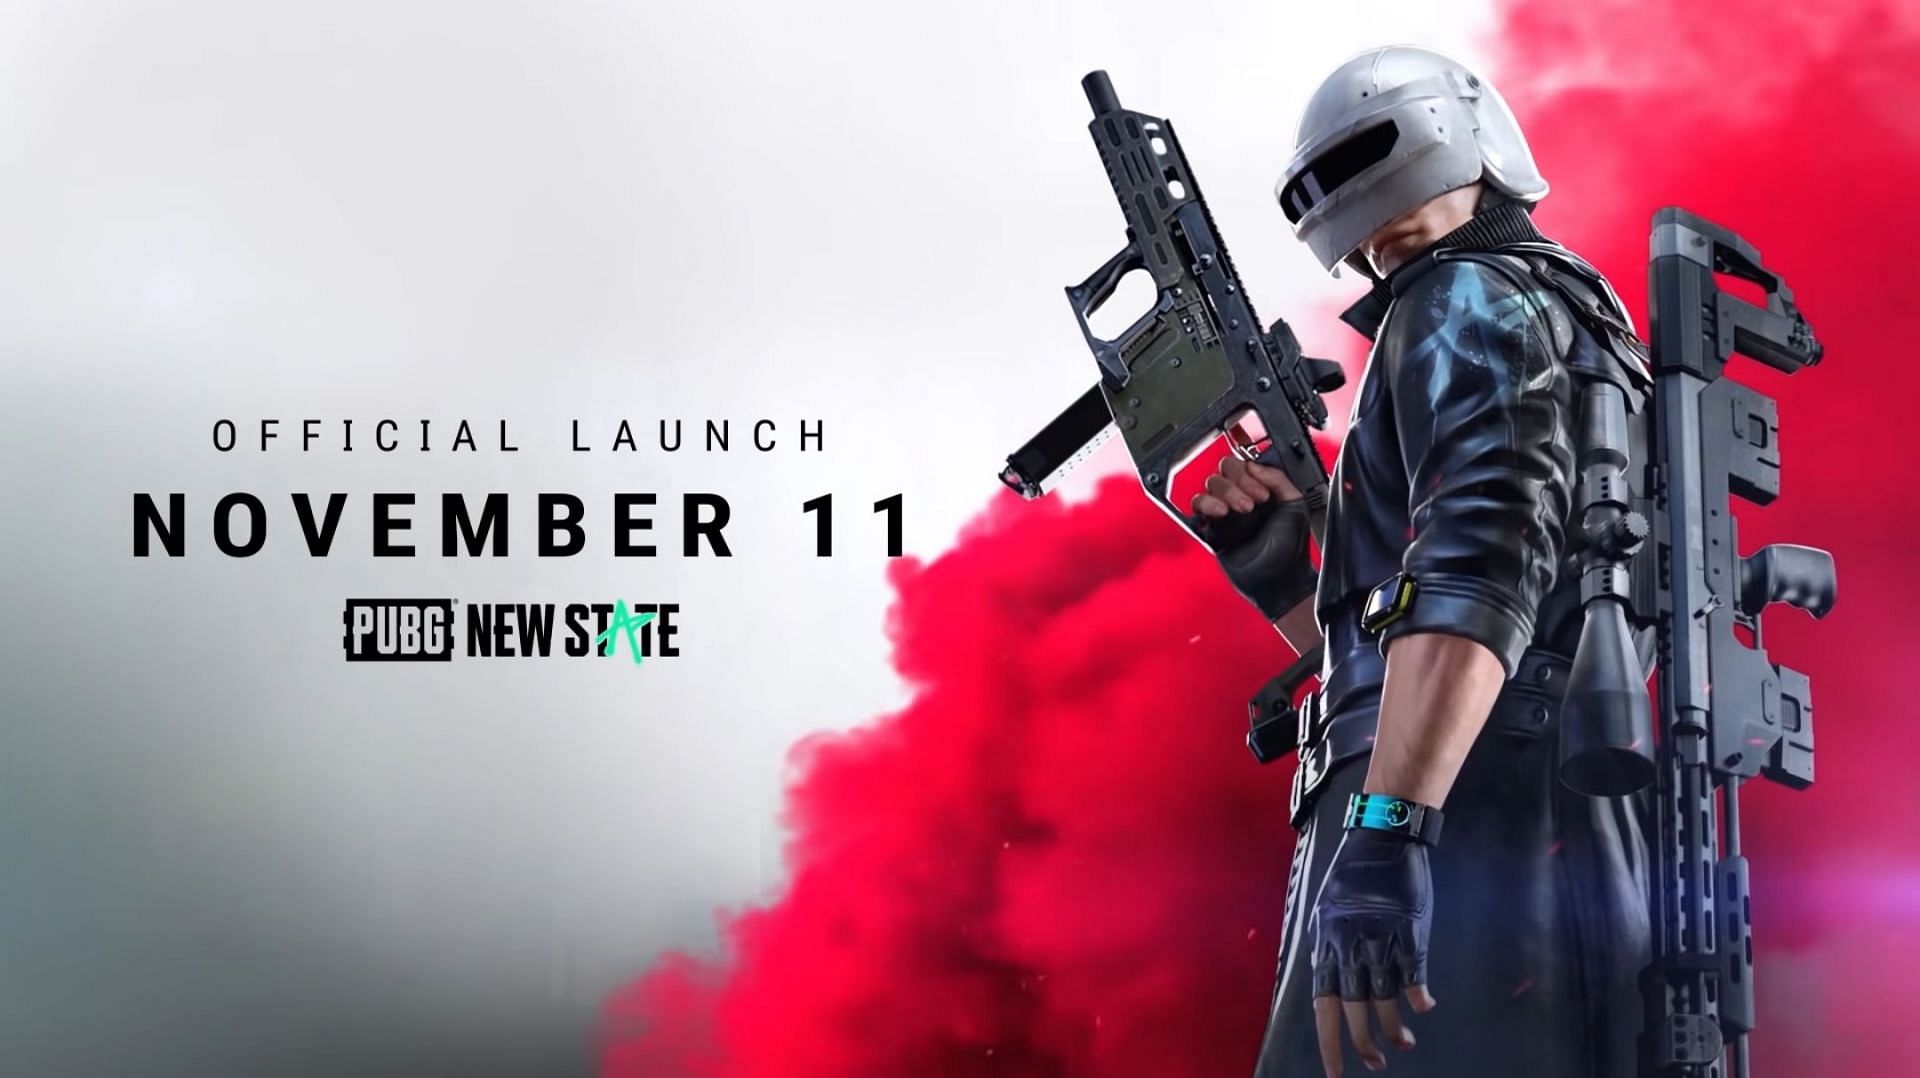 PUBG New State will be released on November 11 (Image via PUBG New State YouTube)